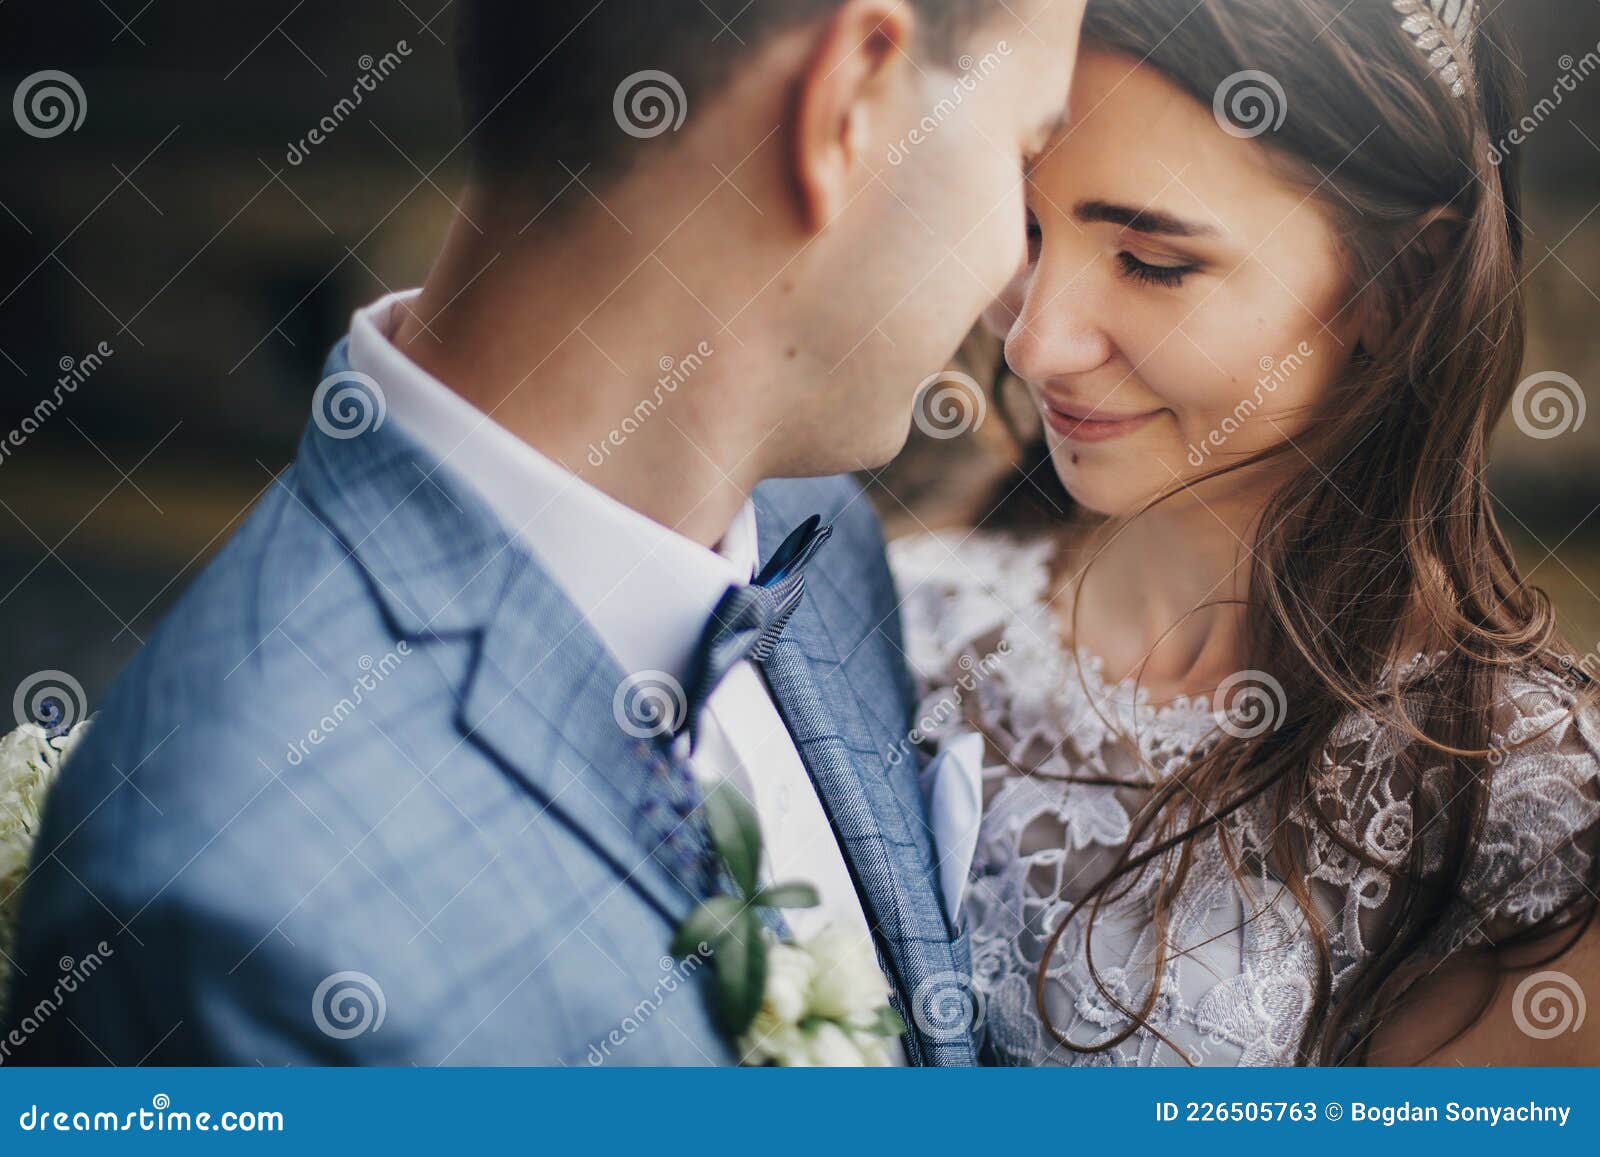 Portraits of Stylish Bride and Groom Embracing on Background of Old